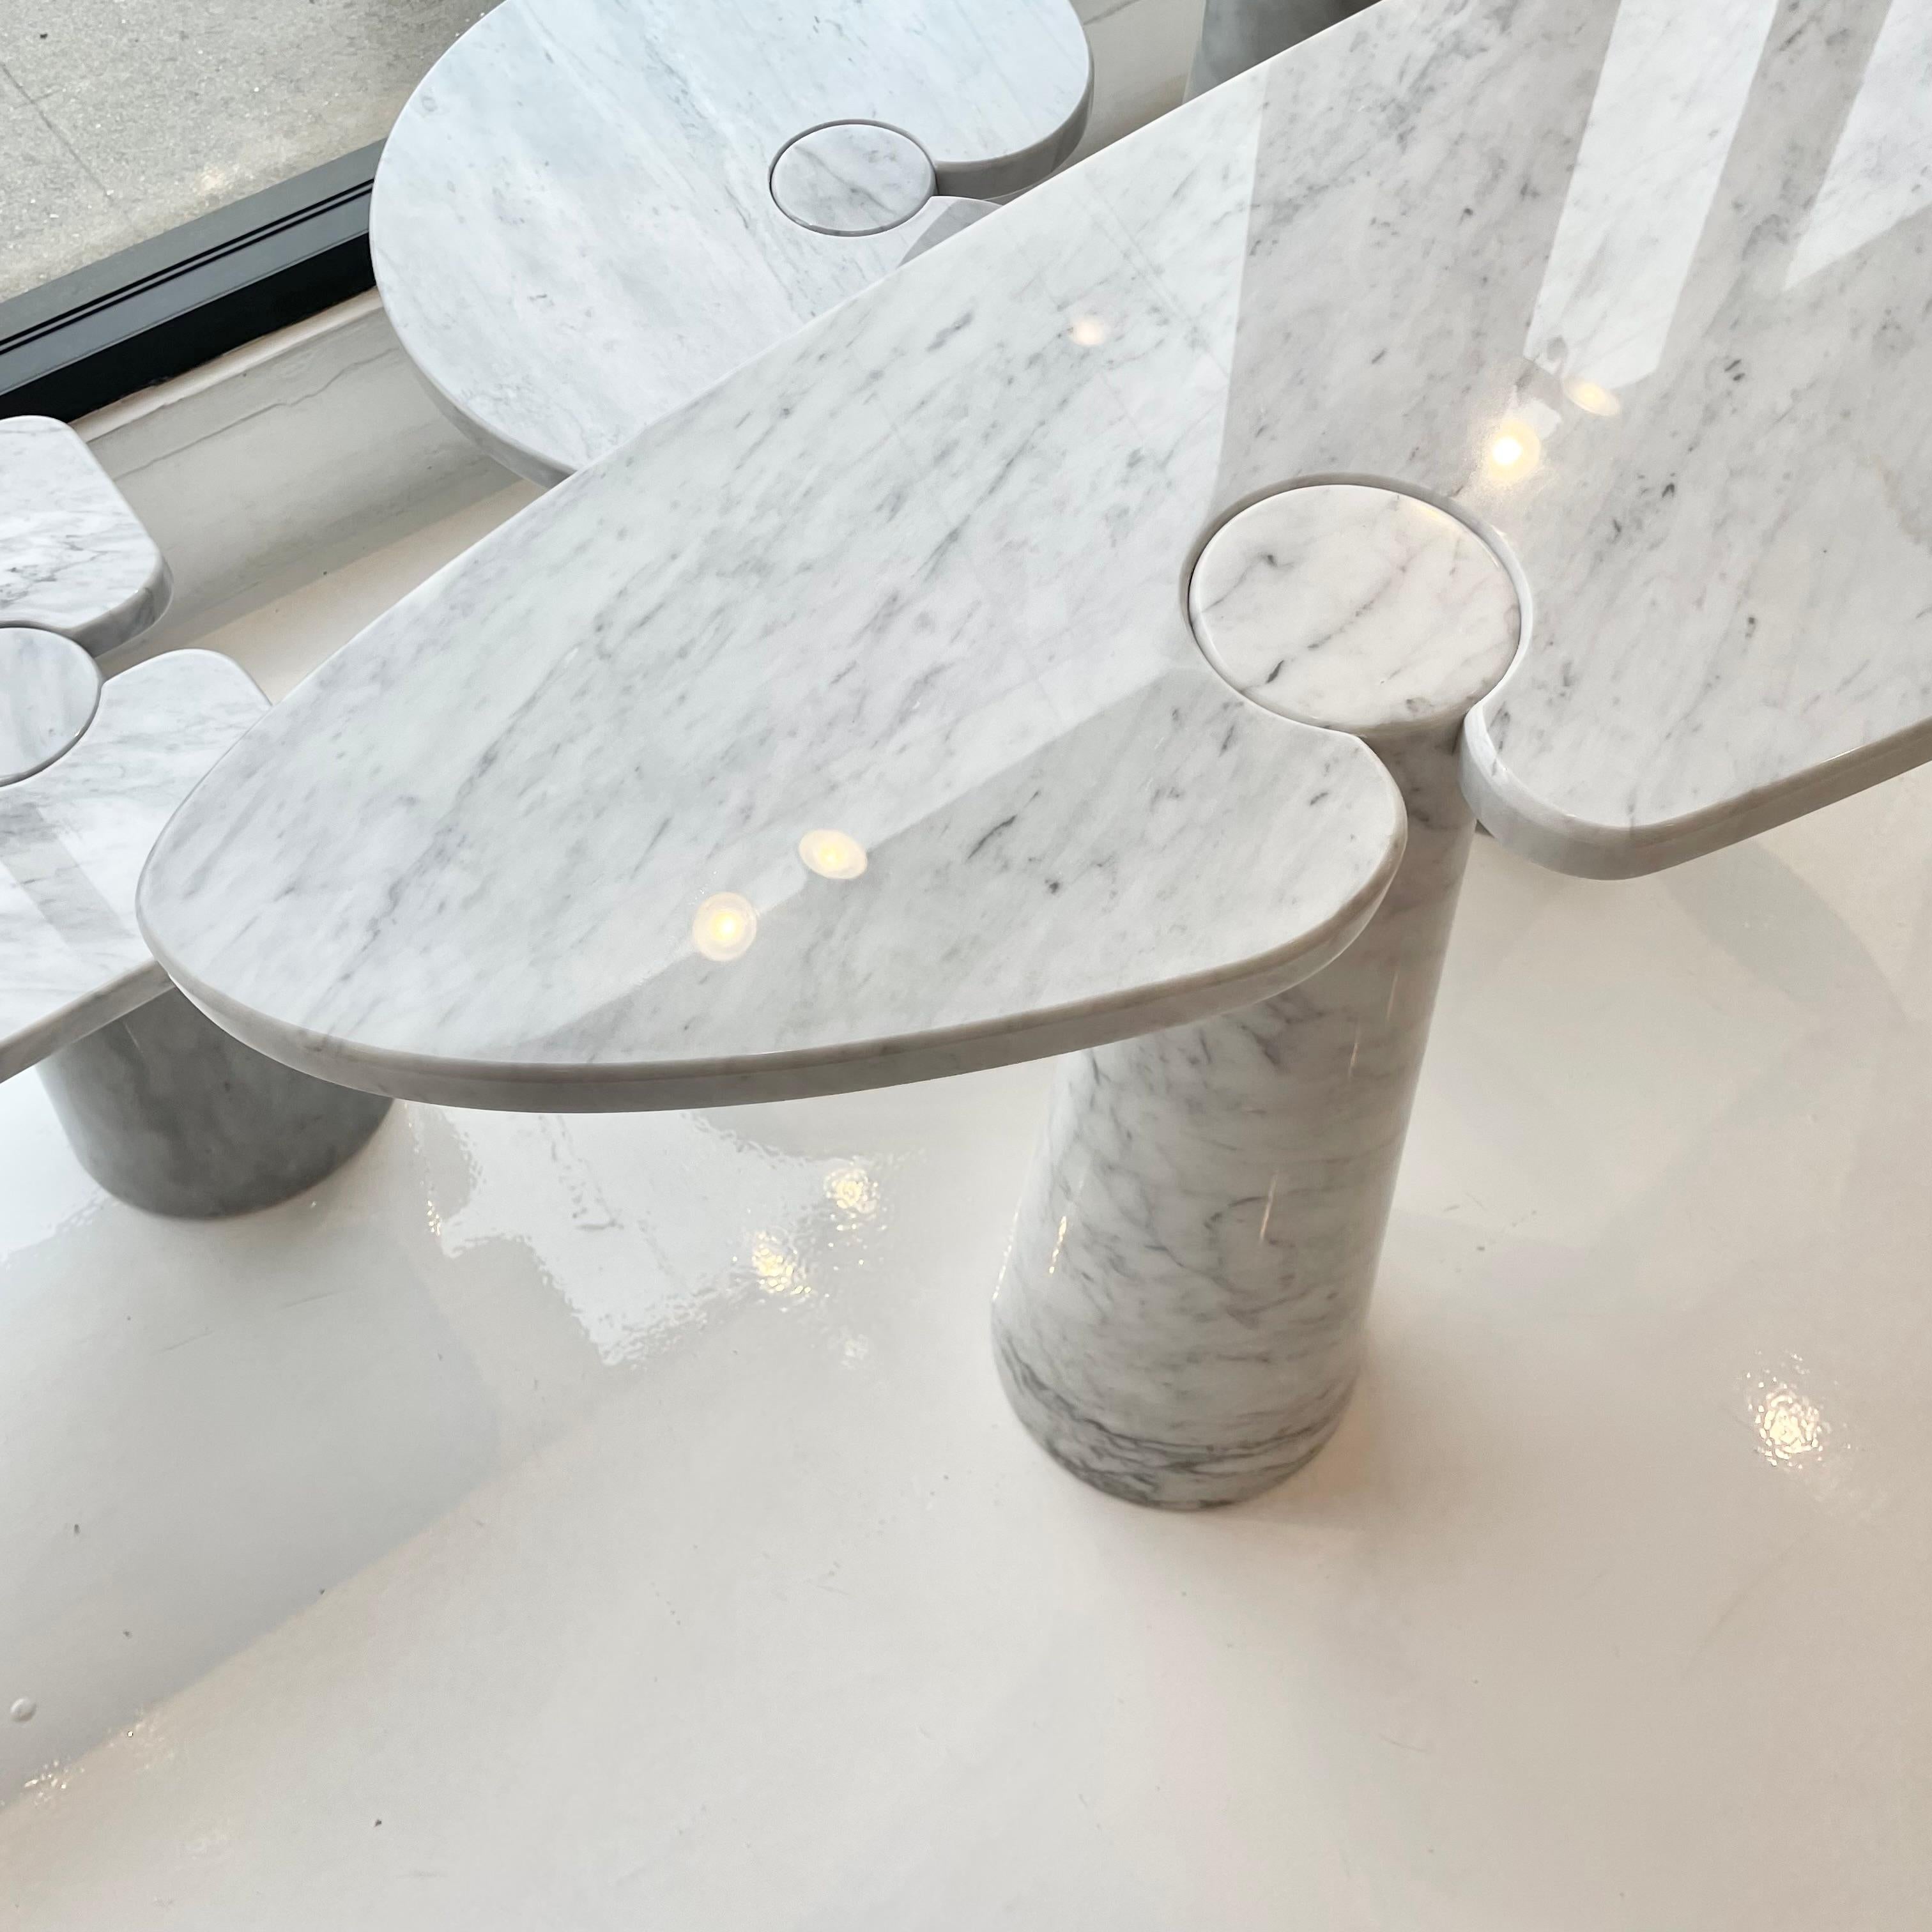 Angelo Mangiarotti Eros Carrara Marble Console for Skipper, 1960s Italy In Good Condition For Sale In Los Angeles, CA